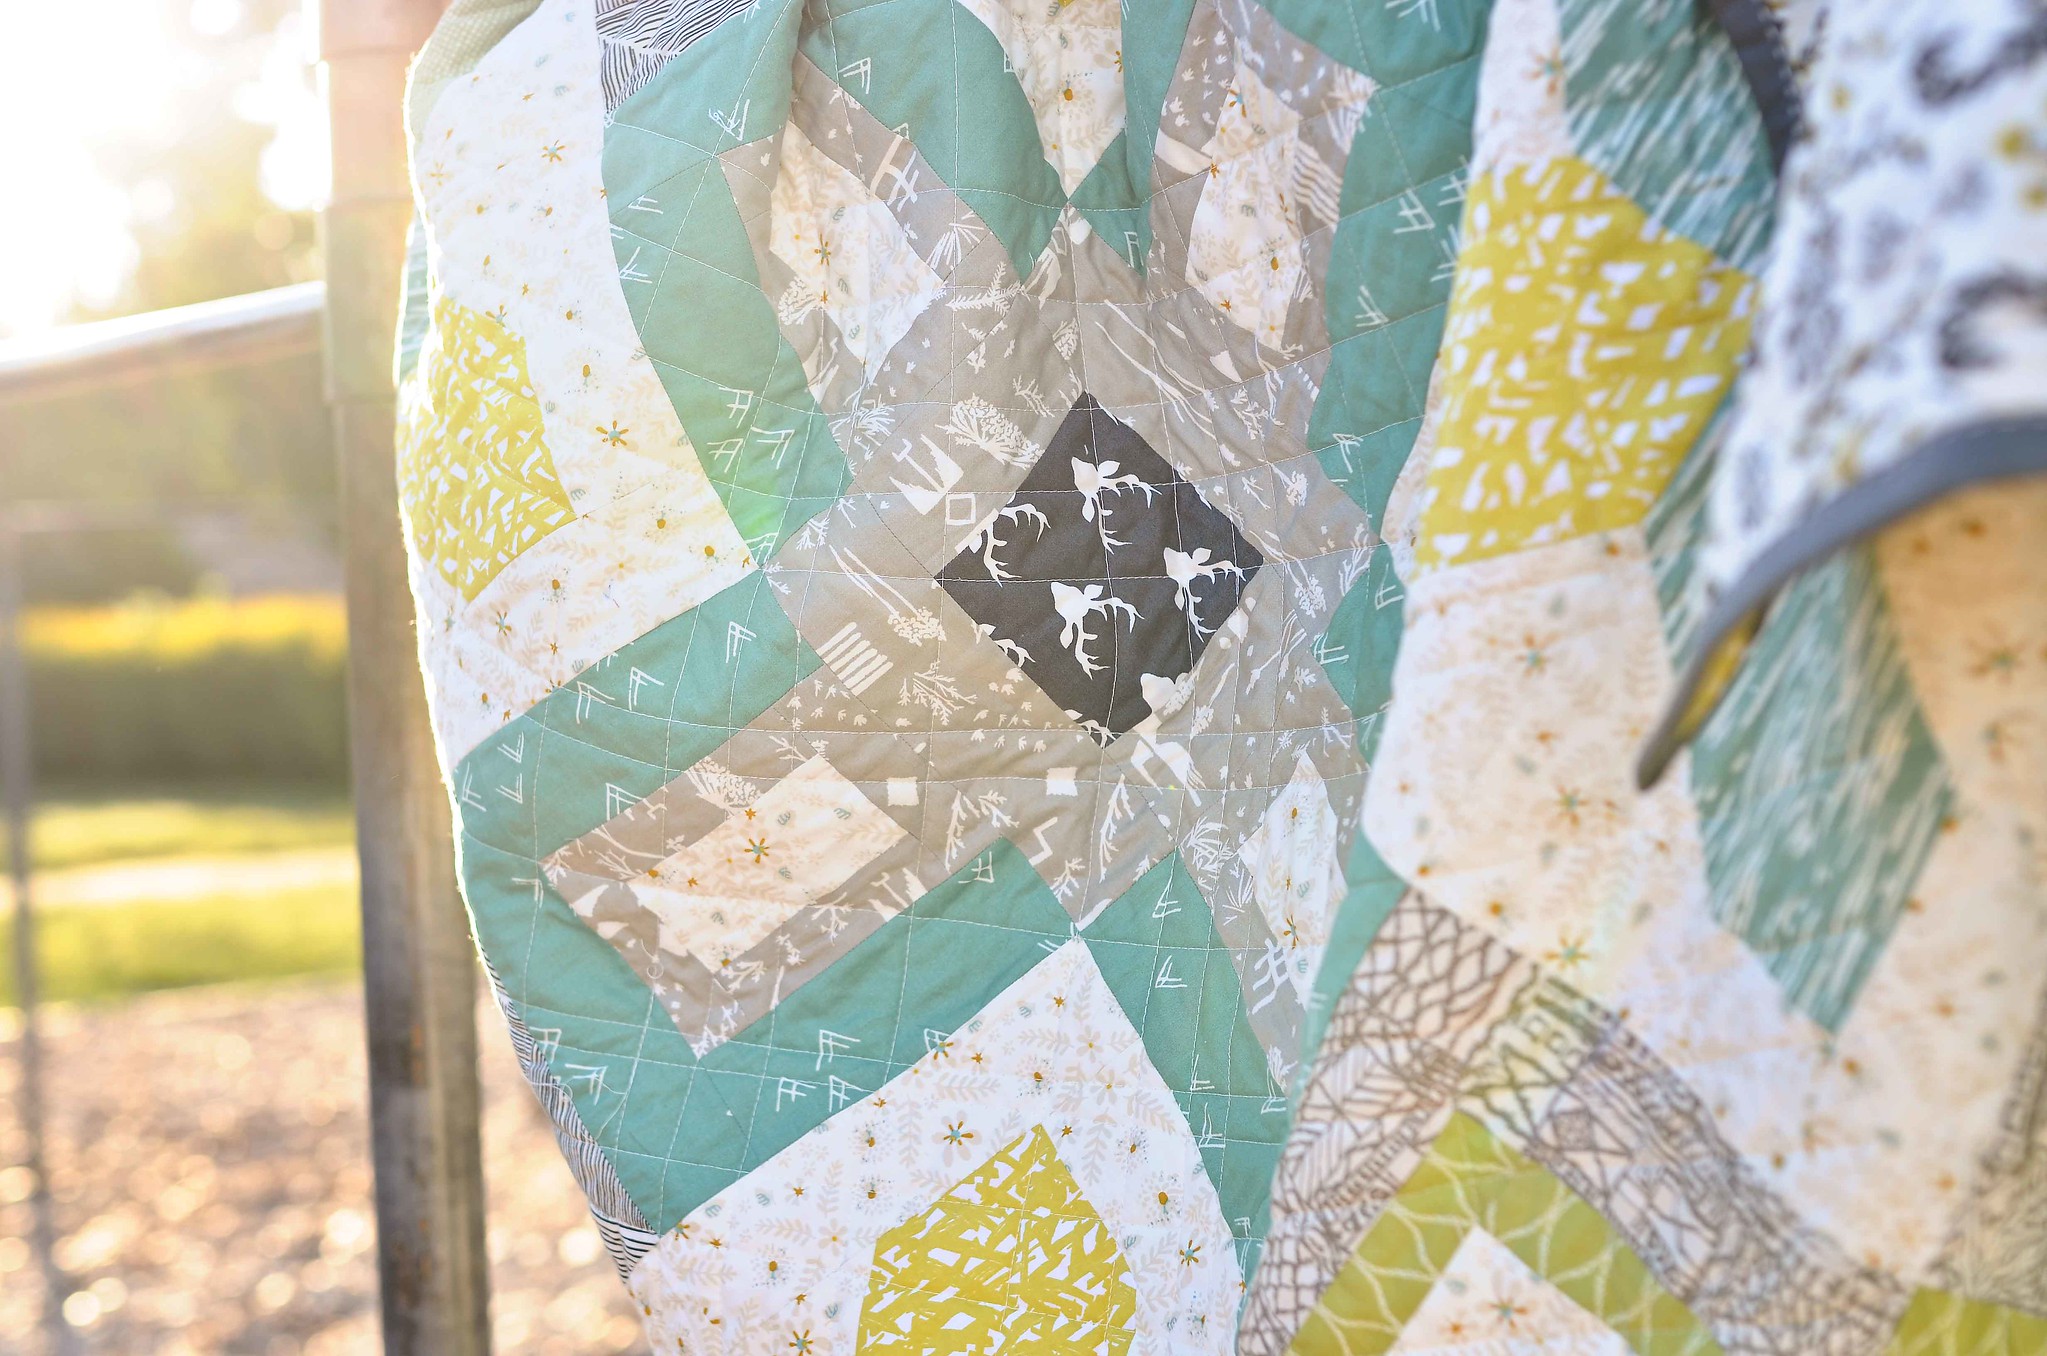 AGF Stitched Symphony Quilt